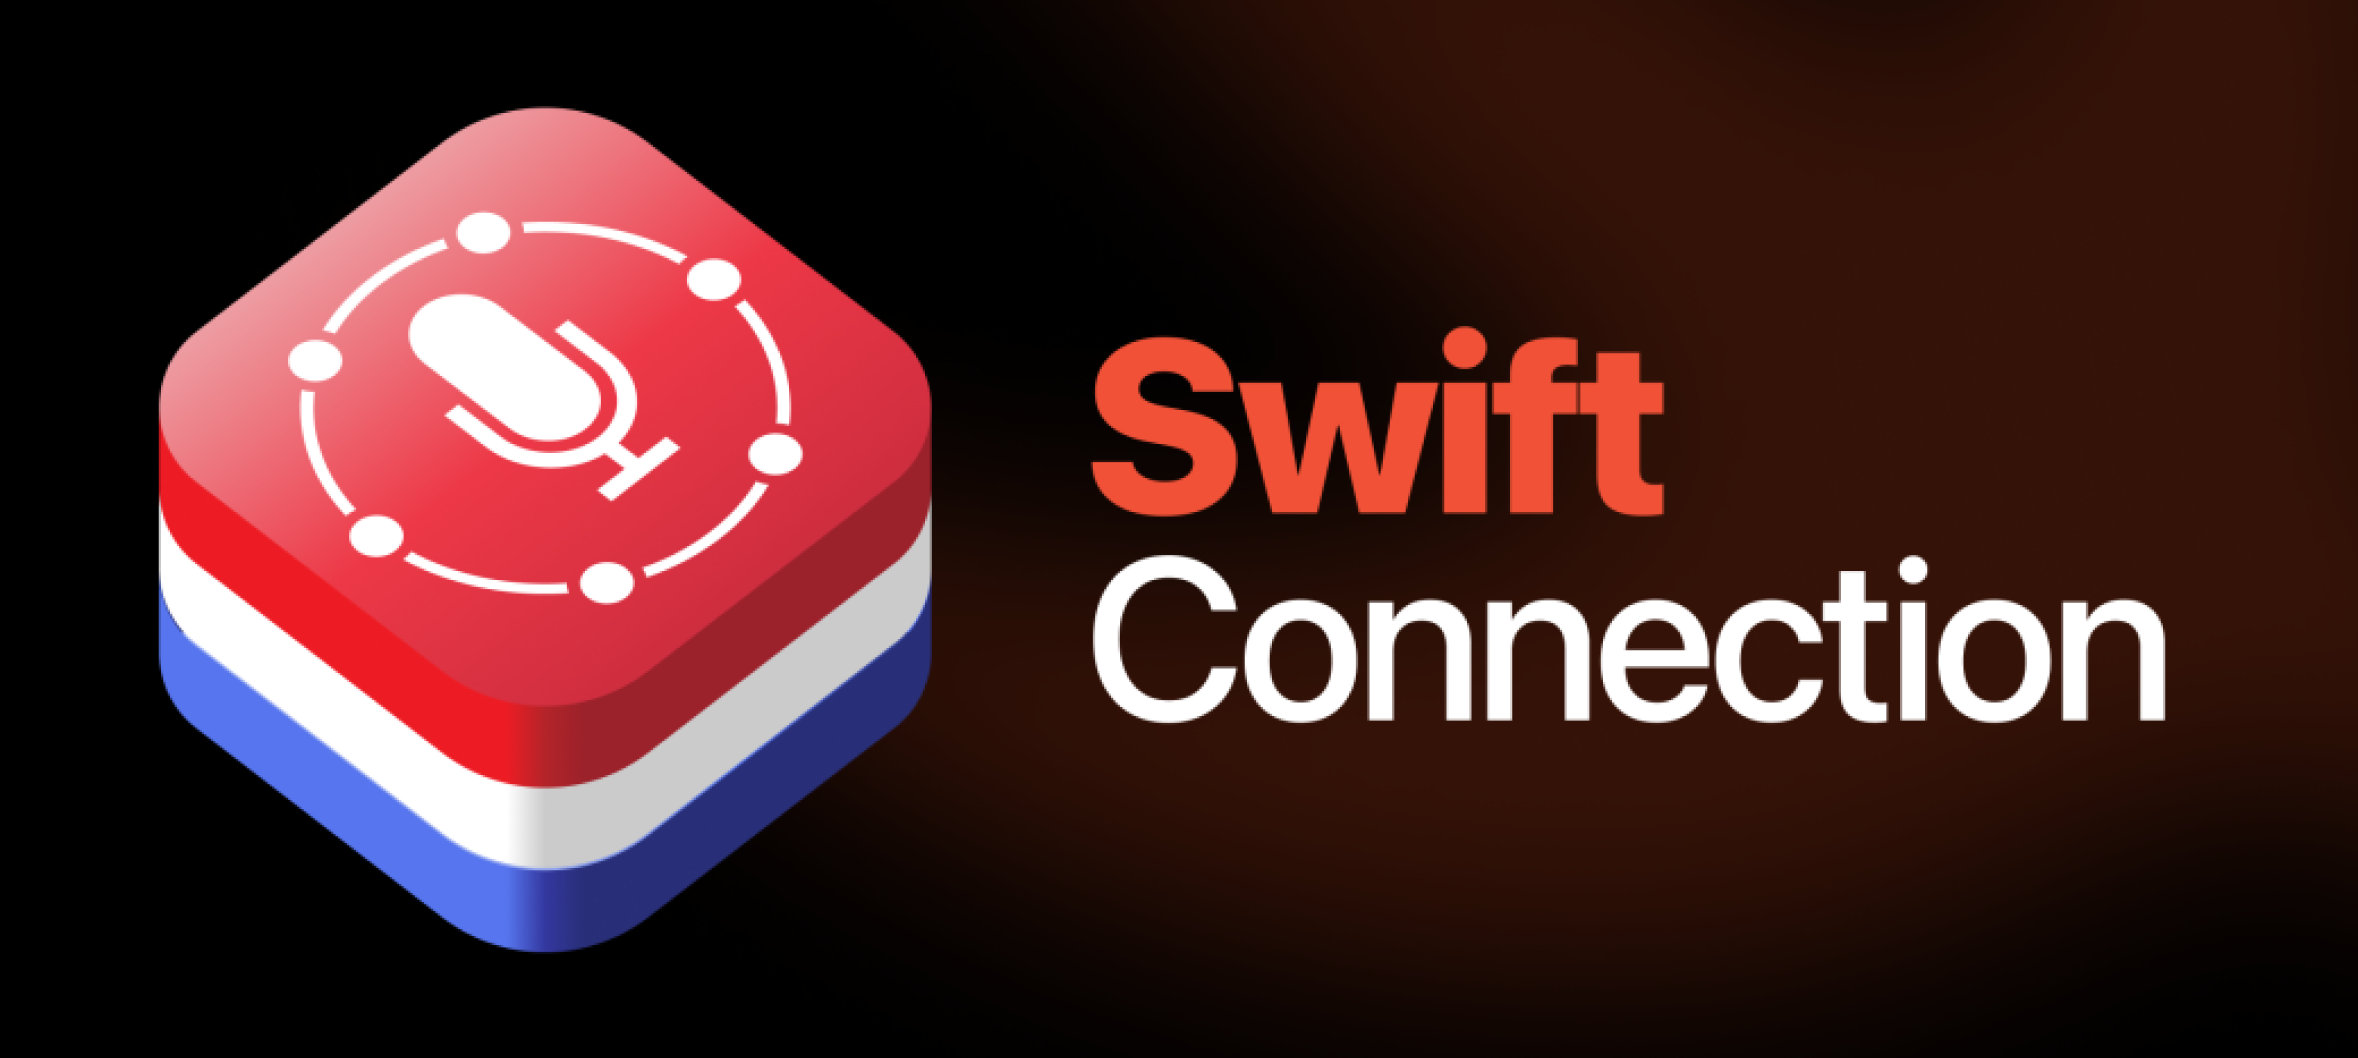 Swift Connection Logo